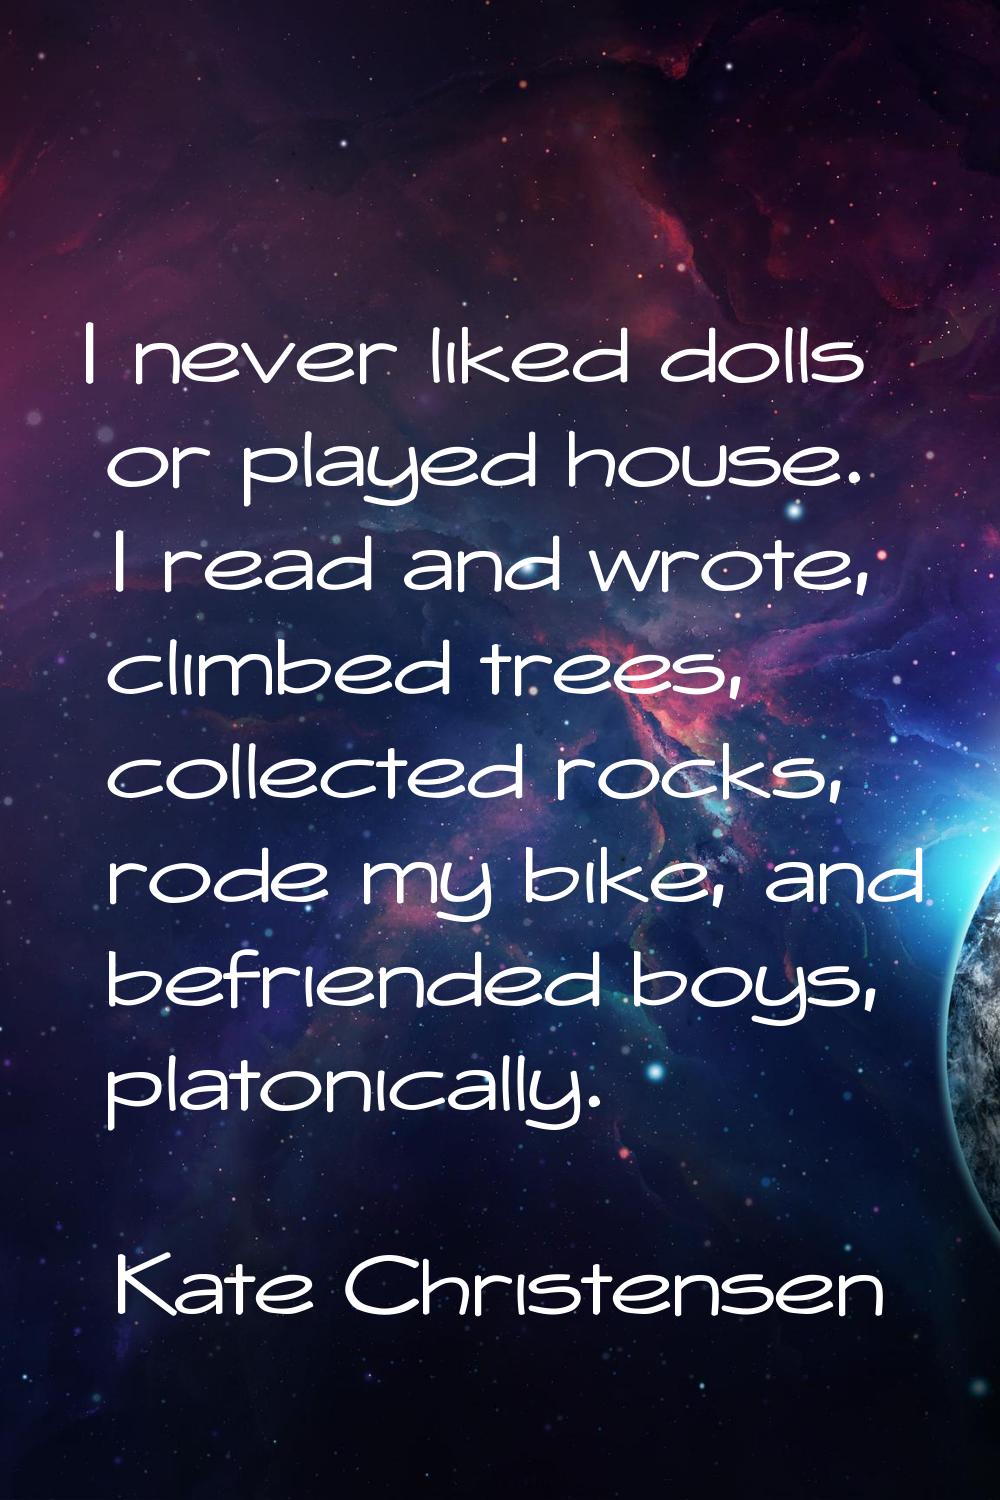 I never liked dolls or played house. I read and wrote, climbed trees, collected rocks, rode my bike